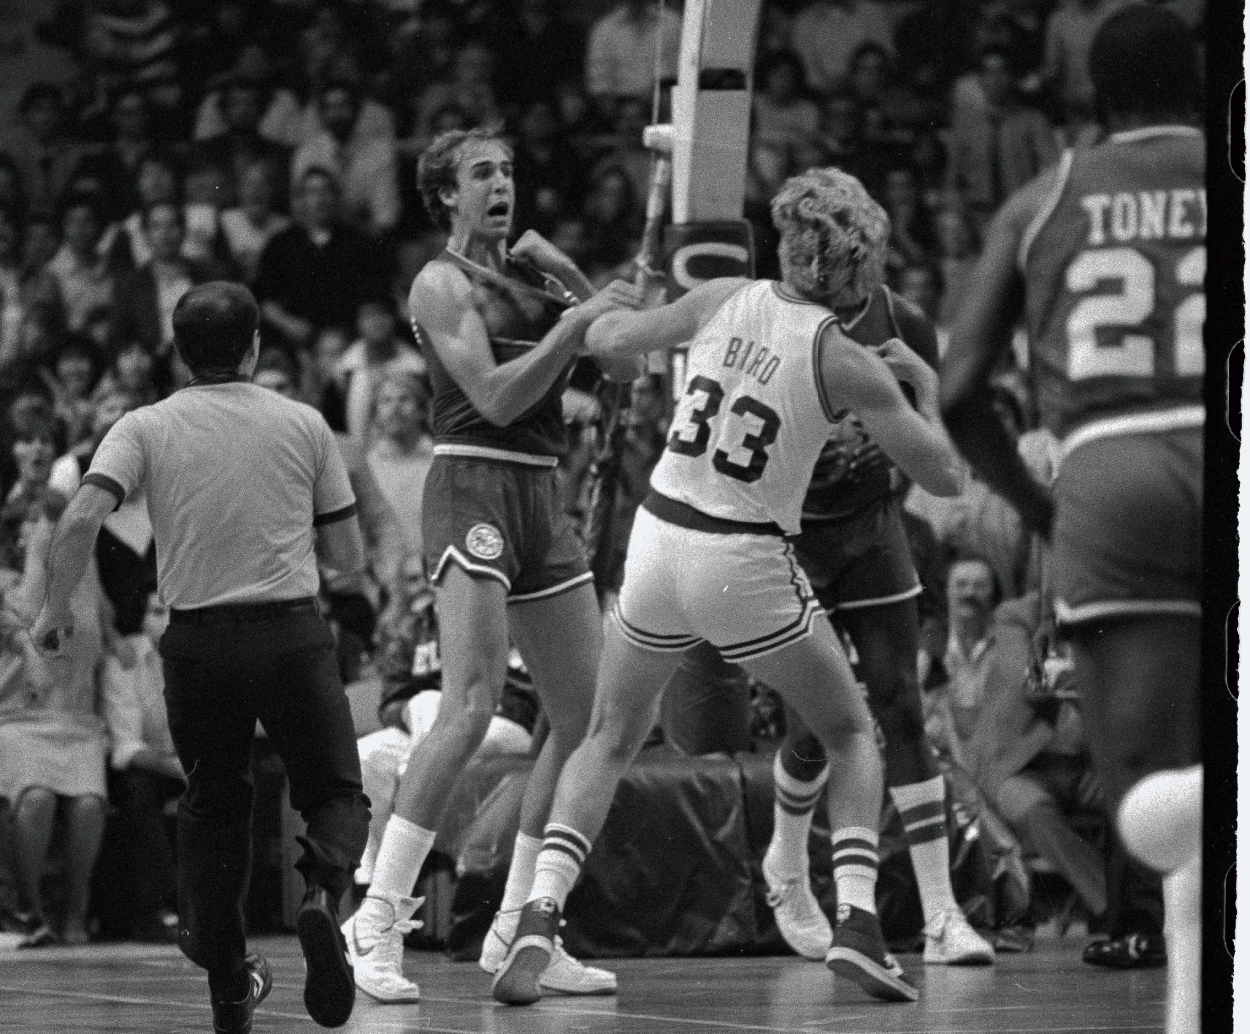 A Boston Celtics Preseason Game Against the 76ers in 1983 Cost Larry Bird and Red Auerbach $4,500